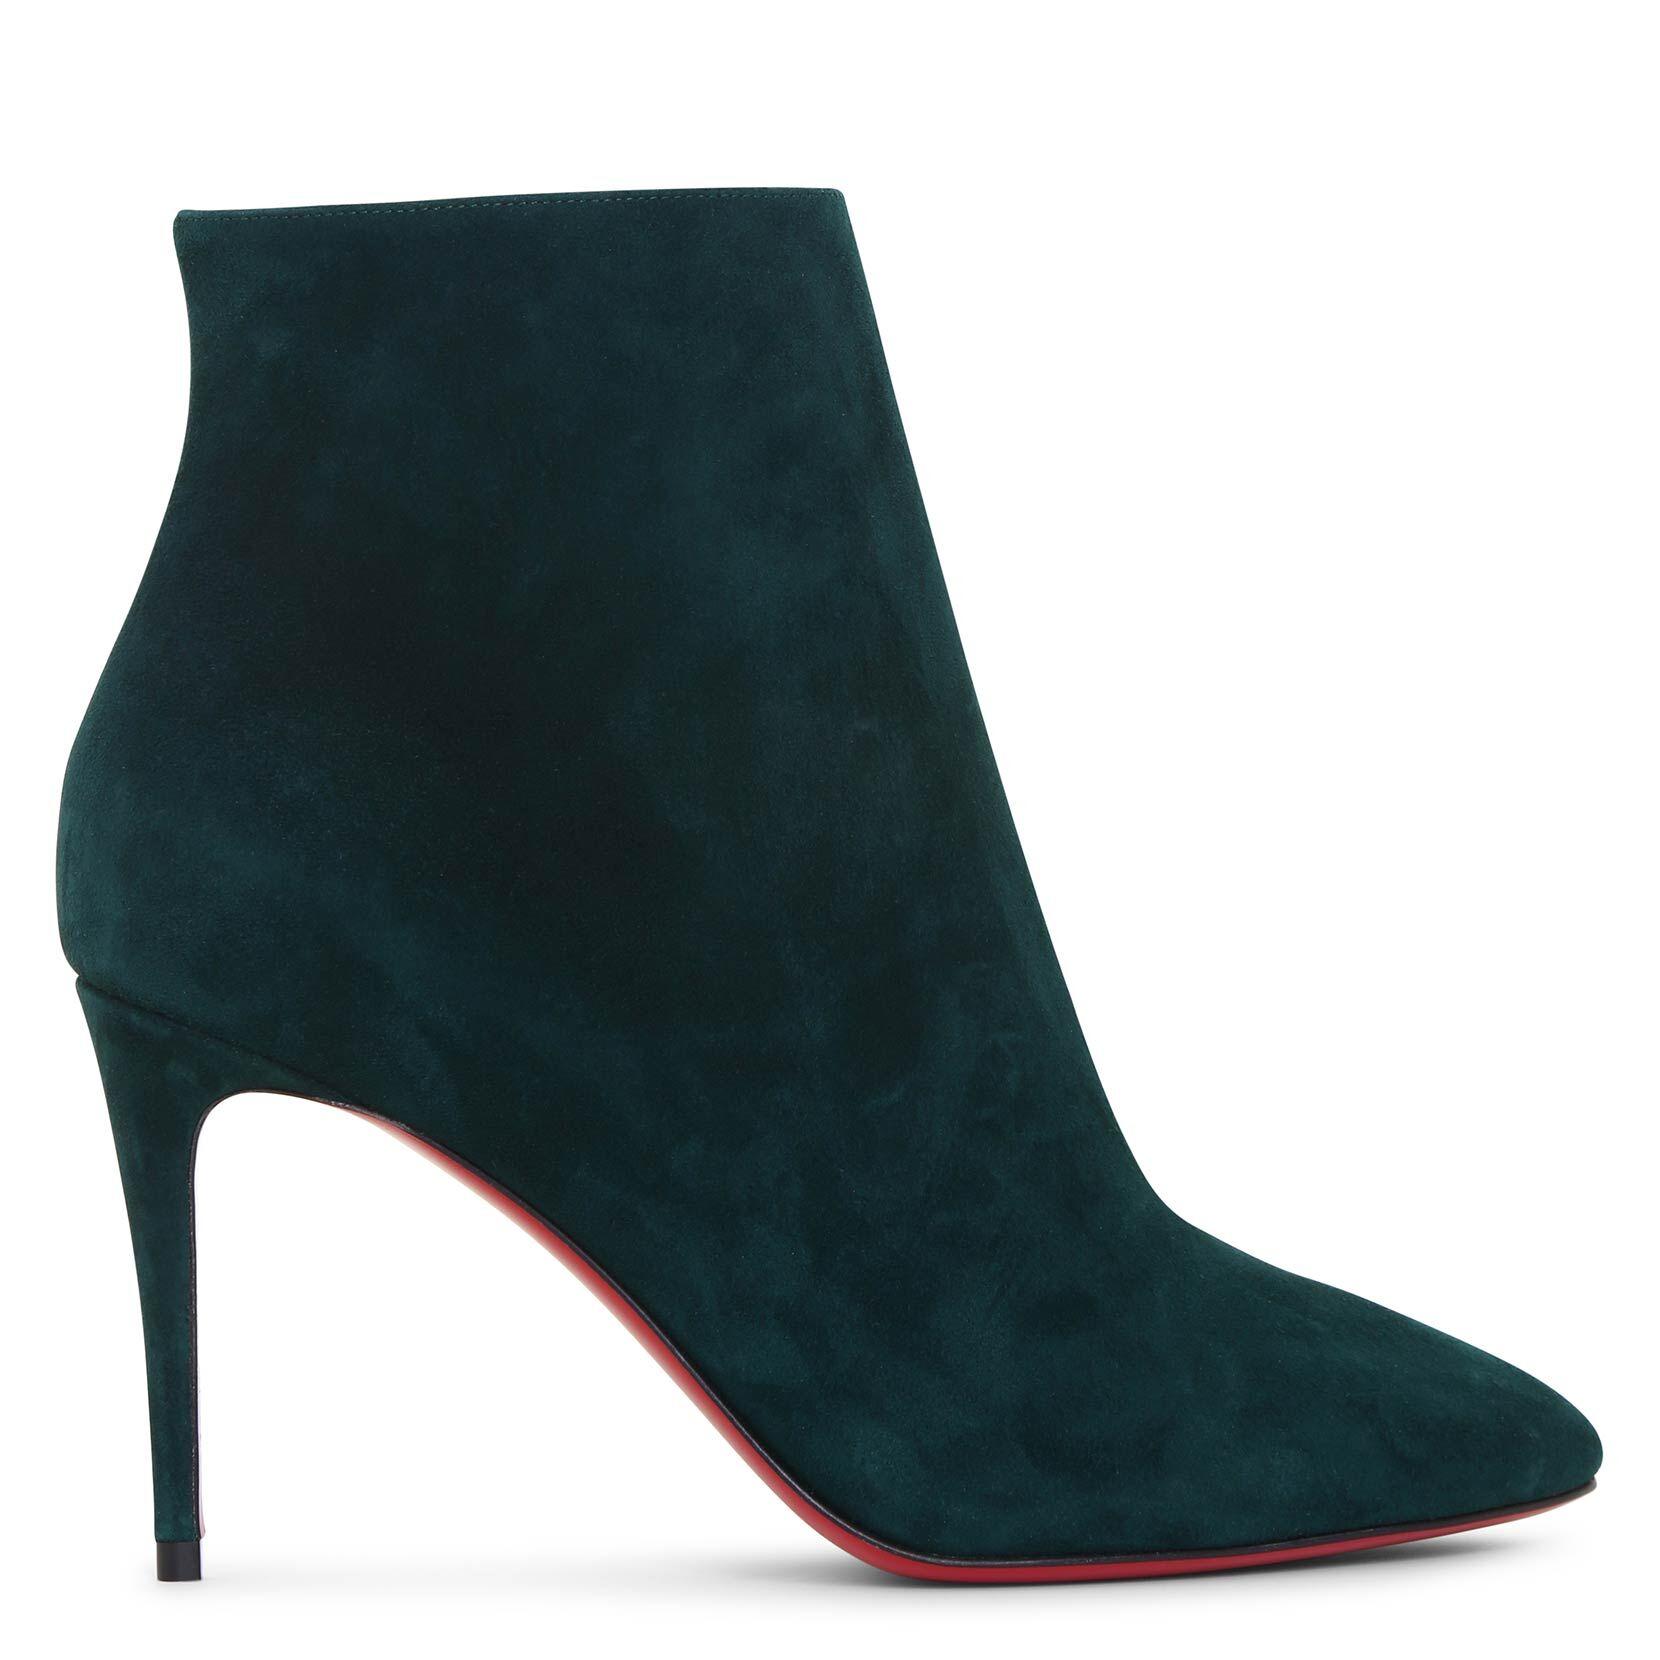 Christian Louboutin Eloise Booty 85 Suede Boots - Lyst